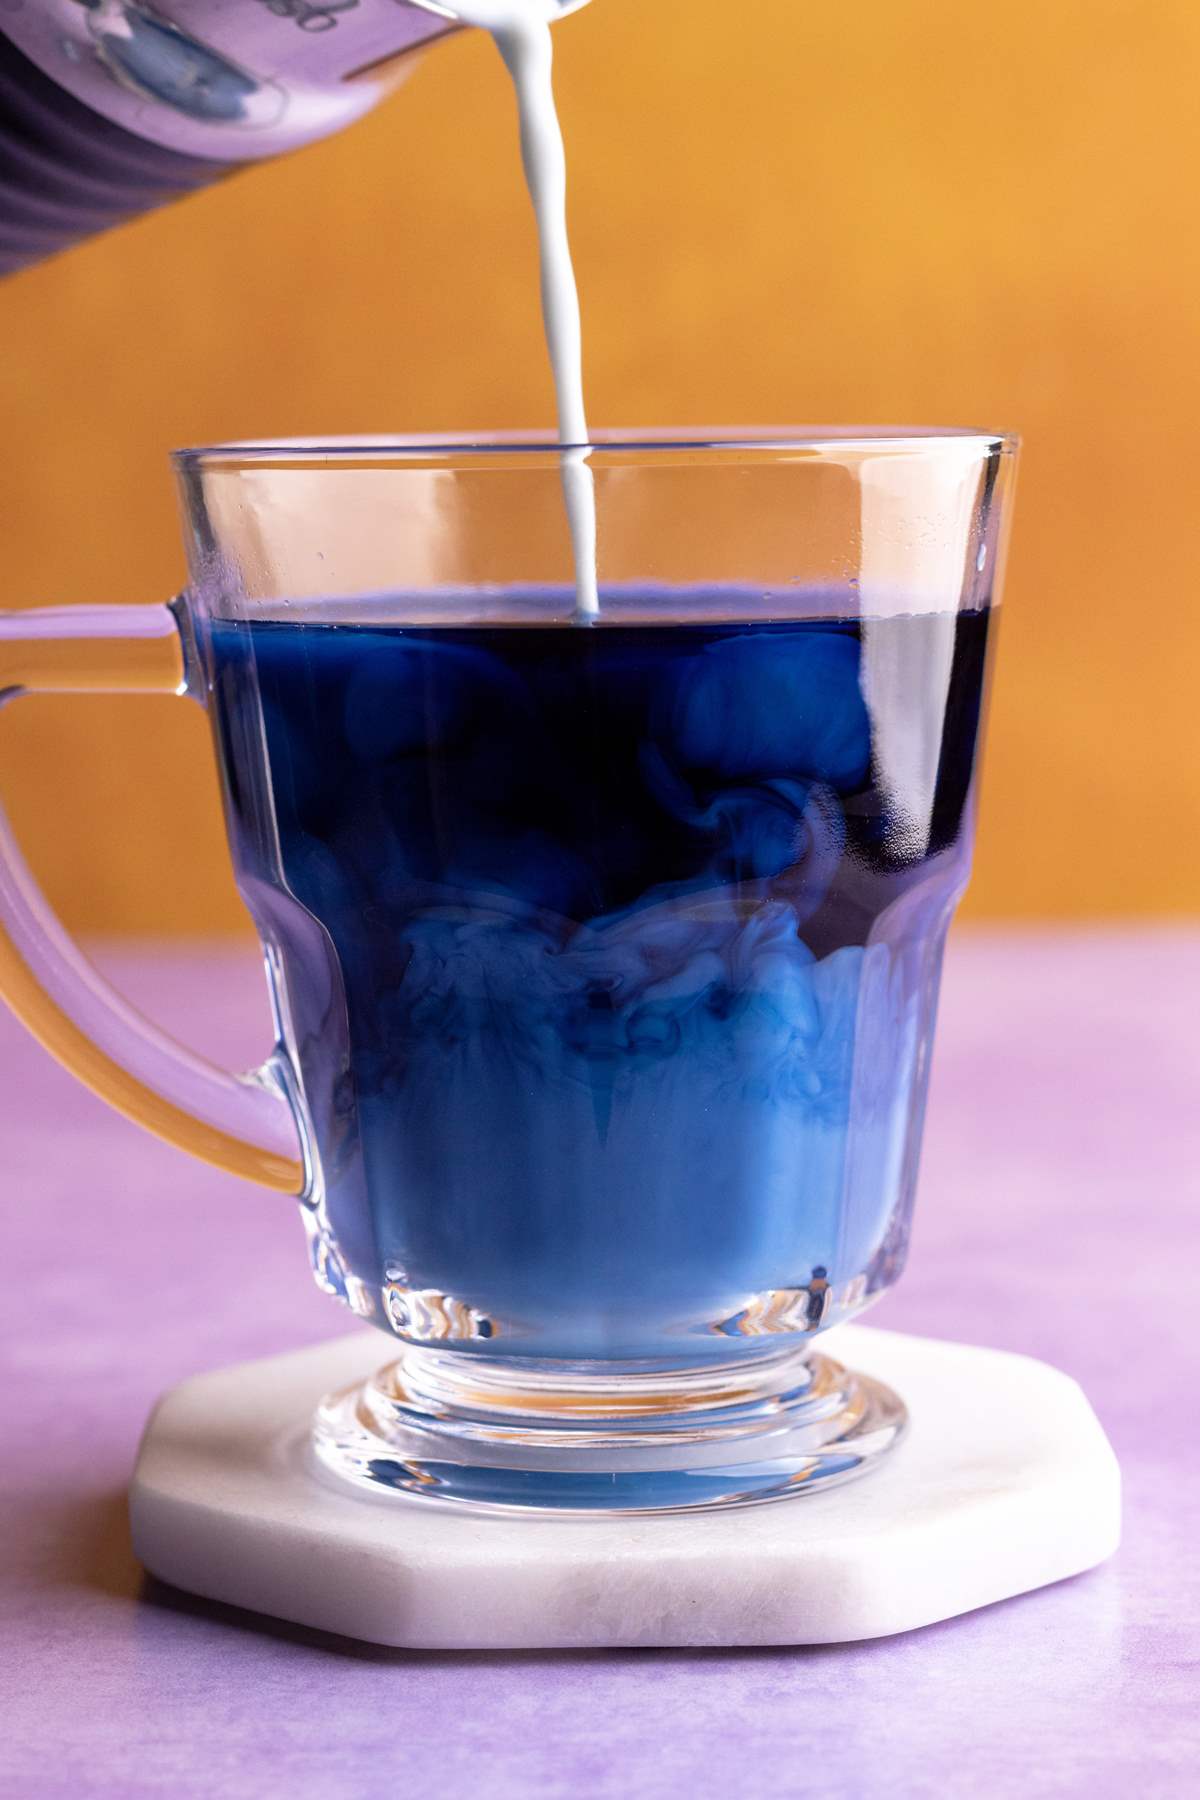 Butterfly pea flower latte pouring into the mug.